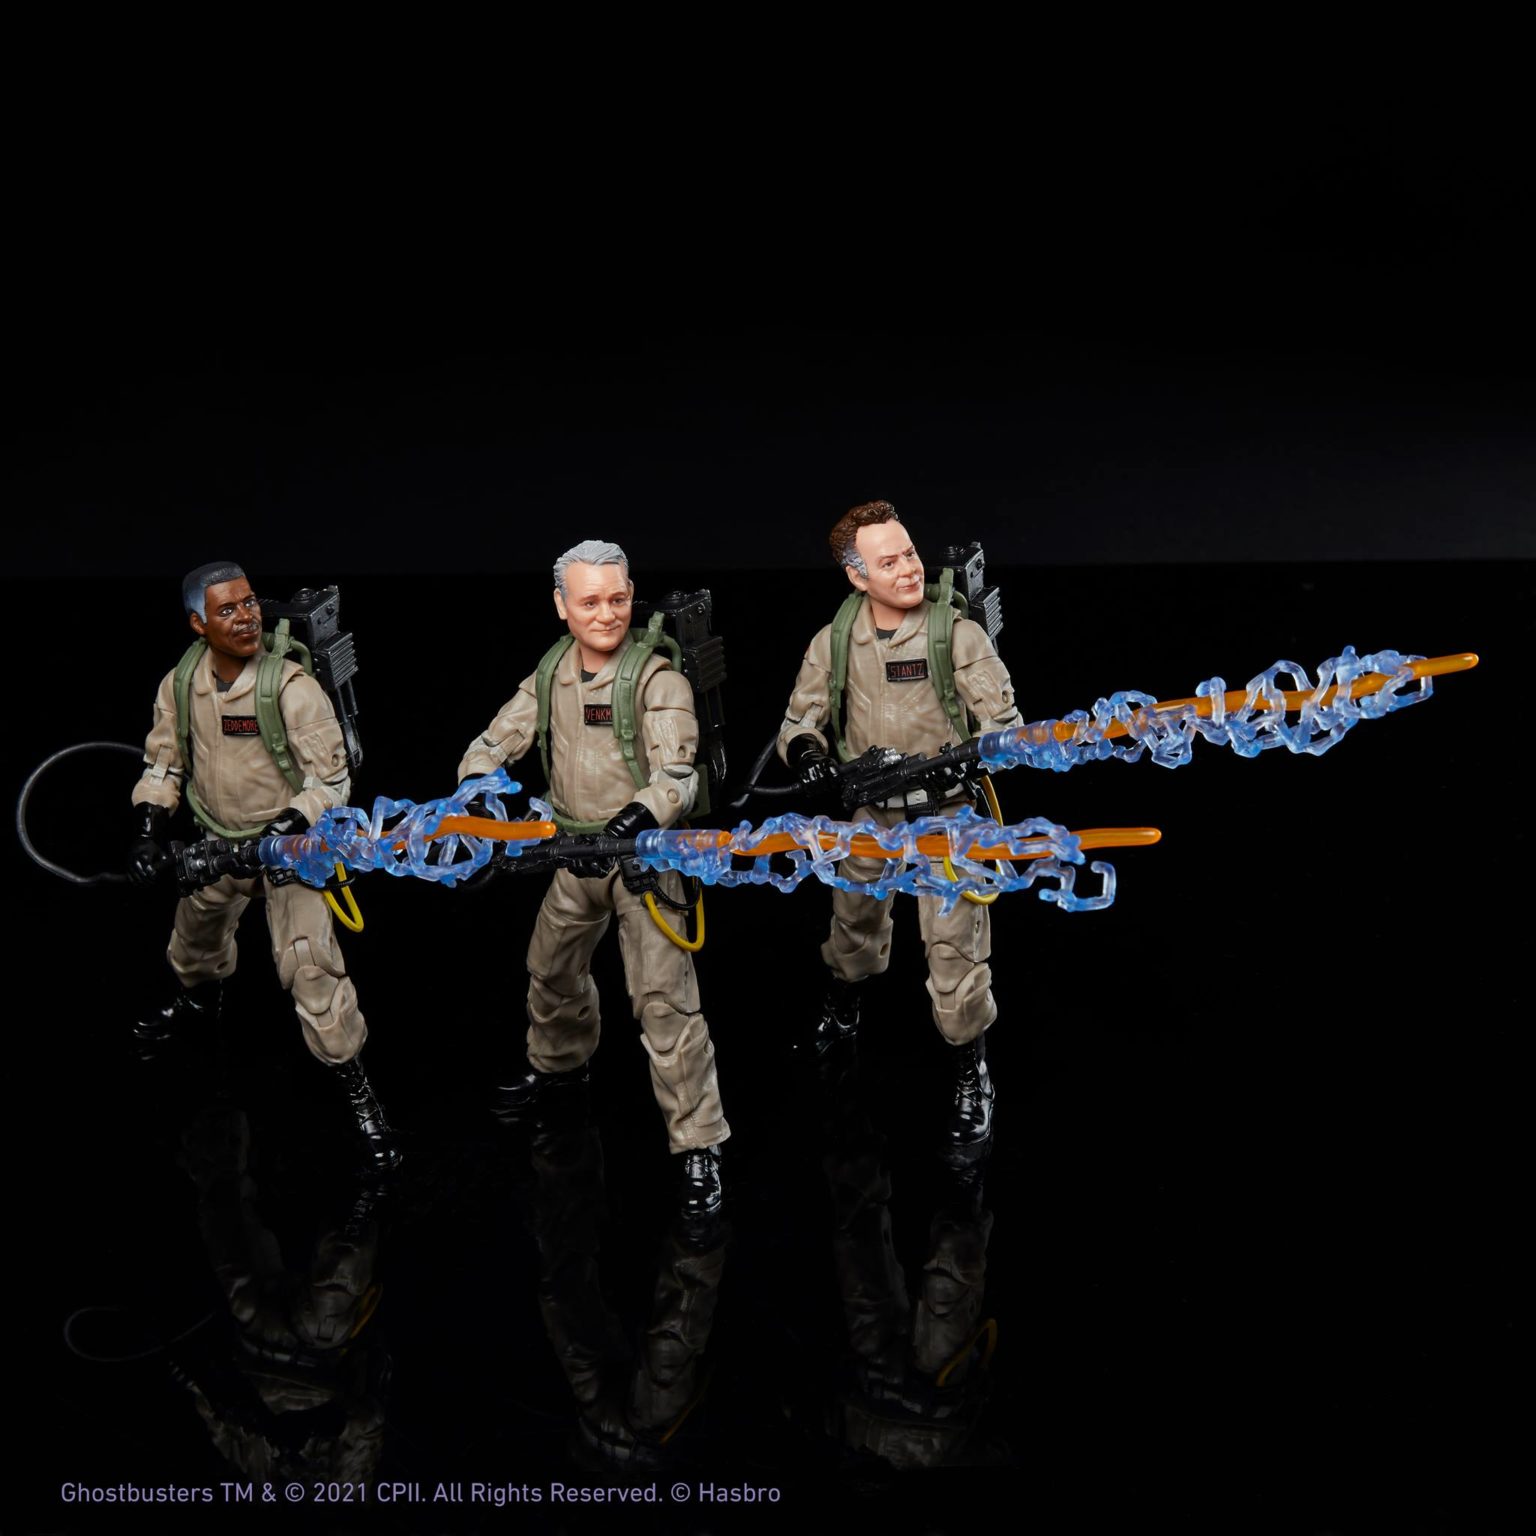 Ghostbusters Afterlife Toys Revealed by Hasbro – That Park Place Ghostbusters Toy